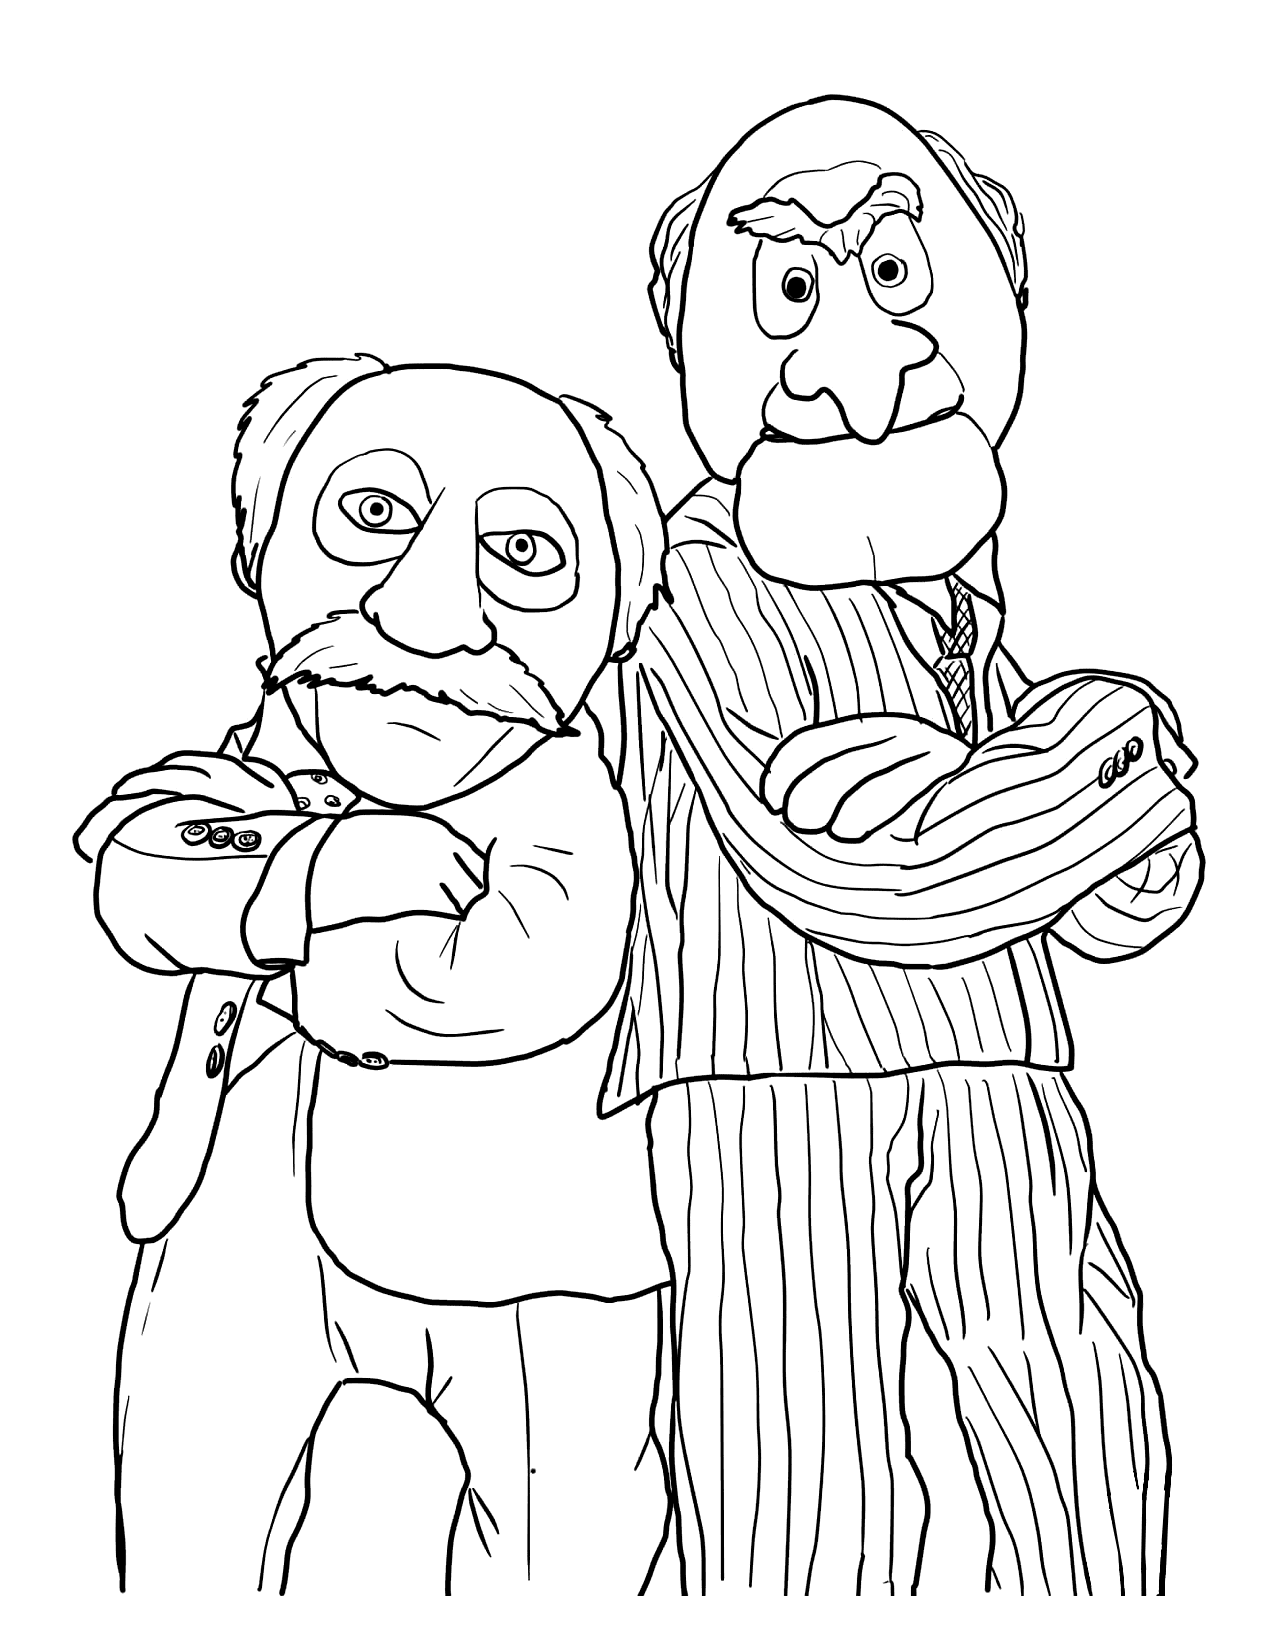 Hecklers Muppet Show Coloring Page